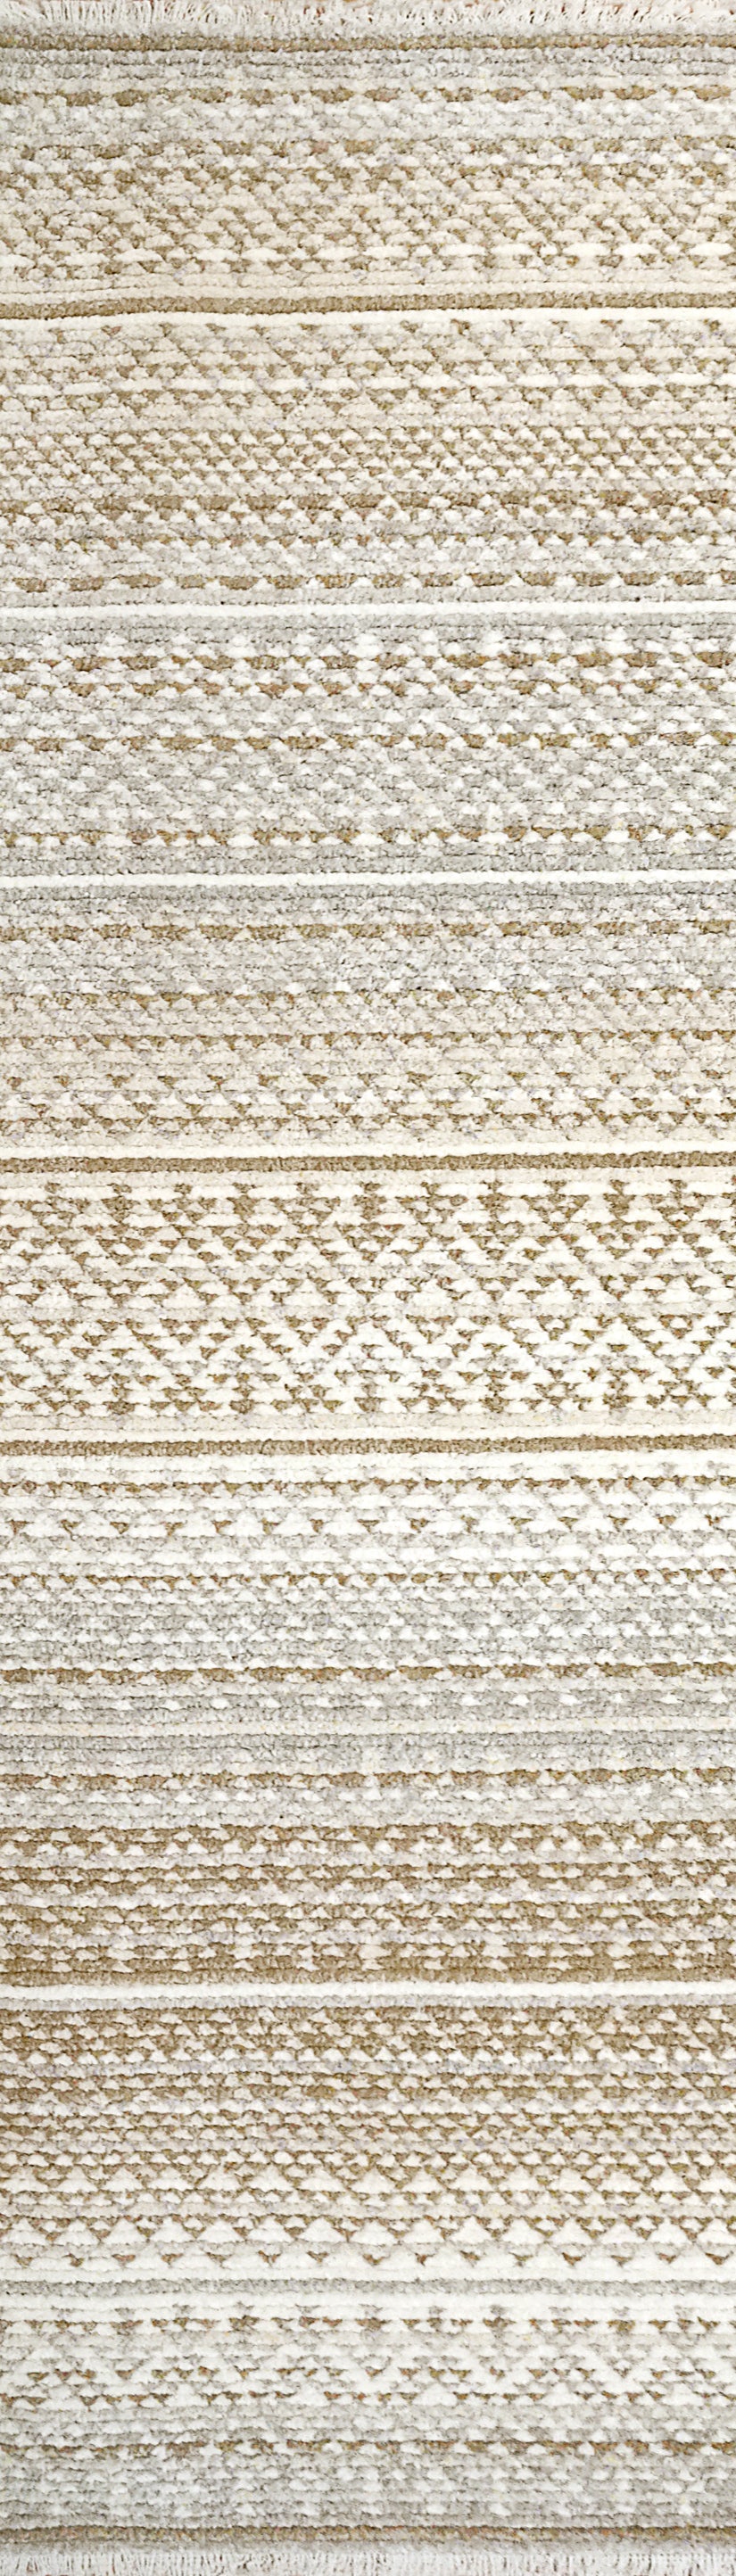 Dynamic Rugs AVERY 6460-889 Ivory/Taupe Rug